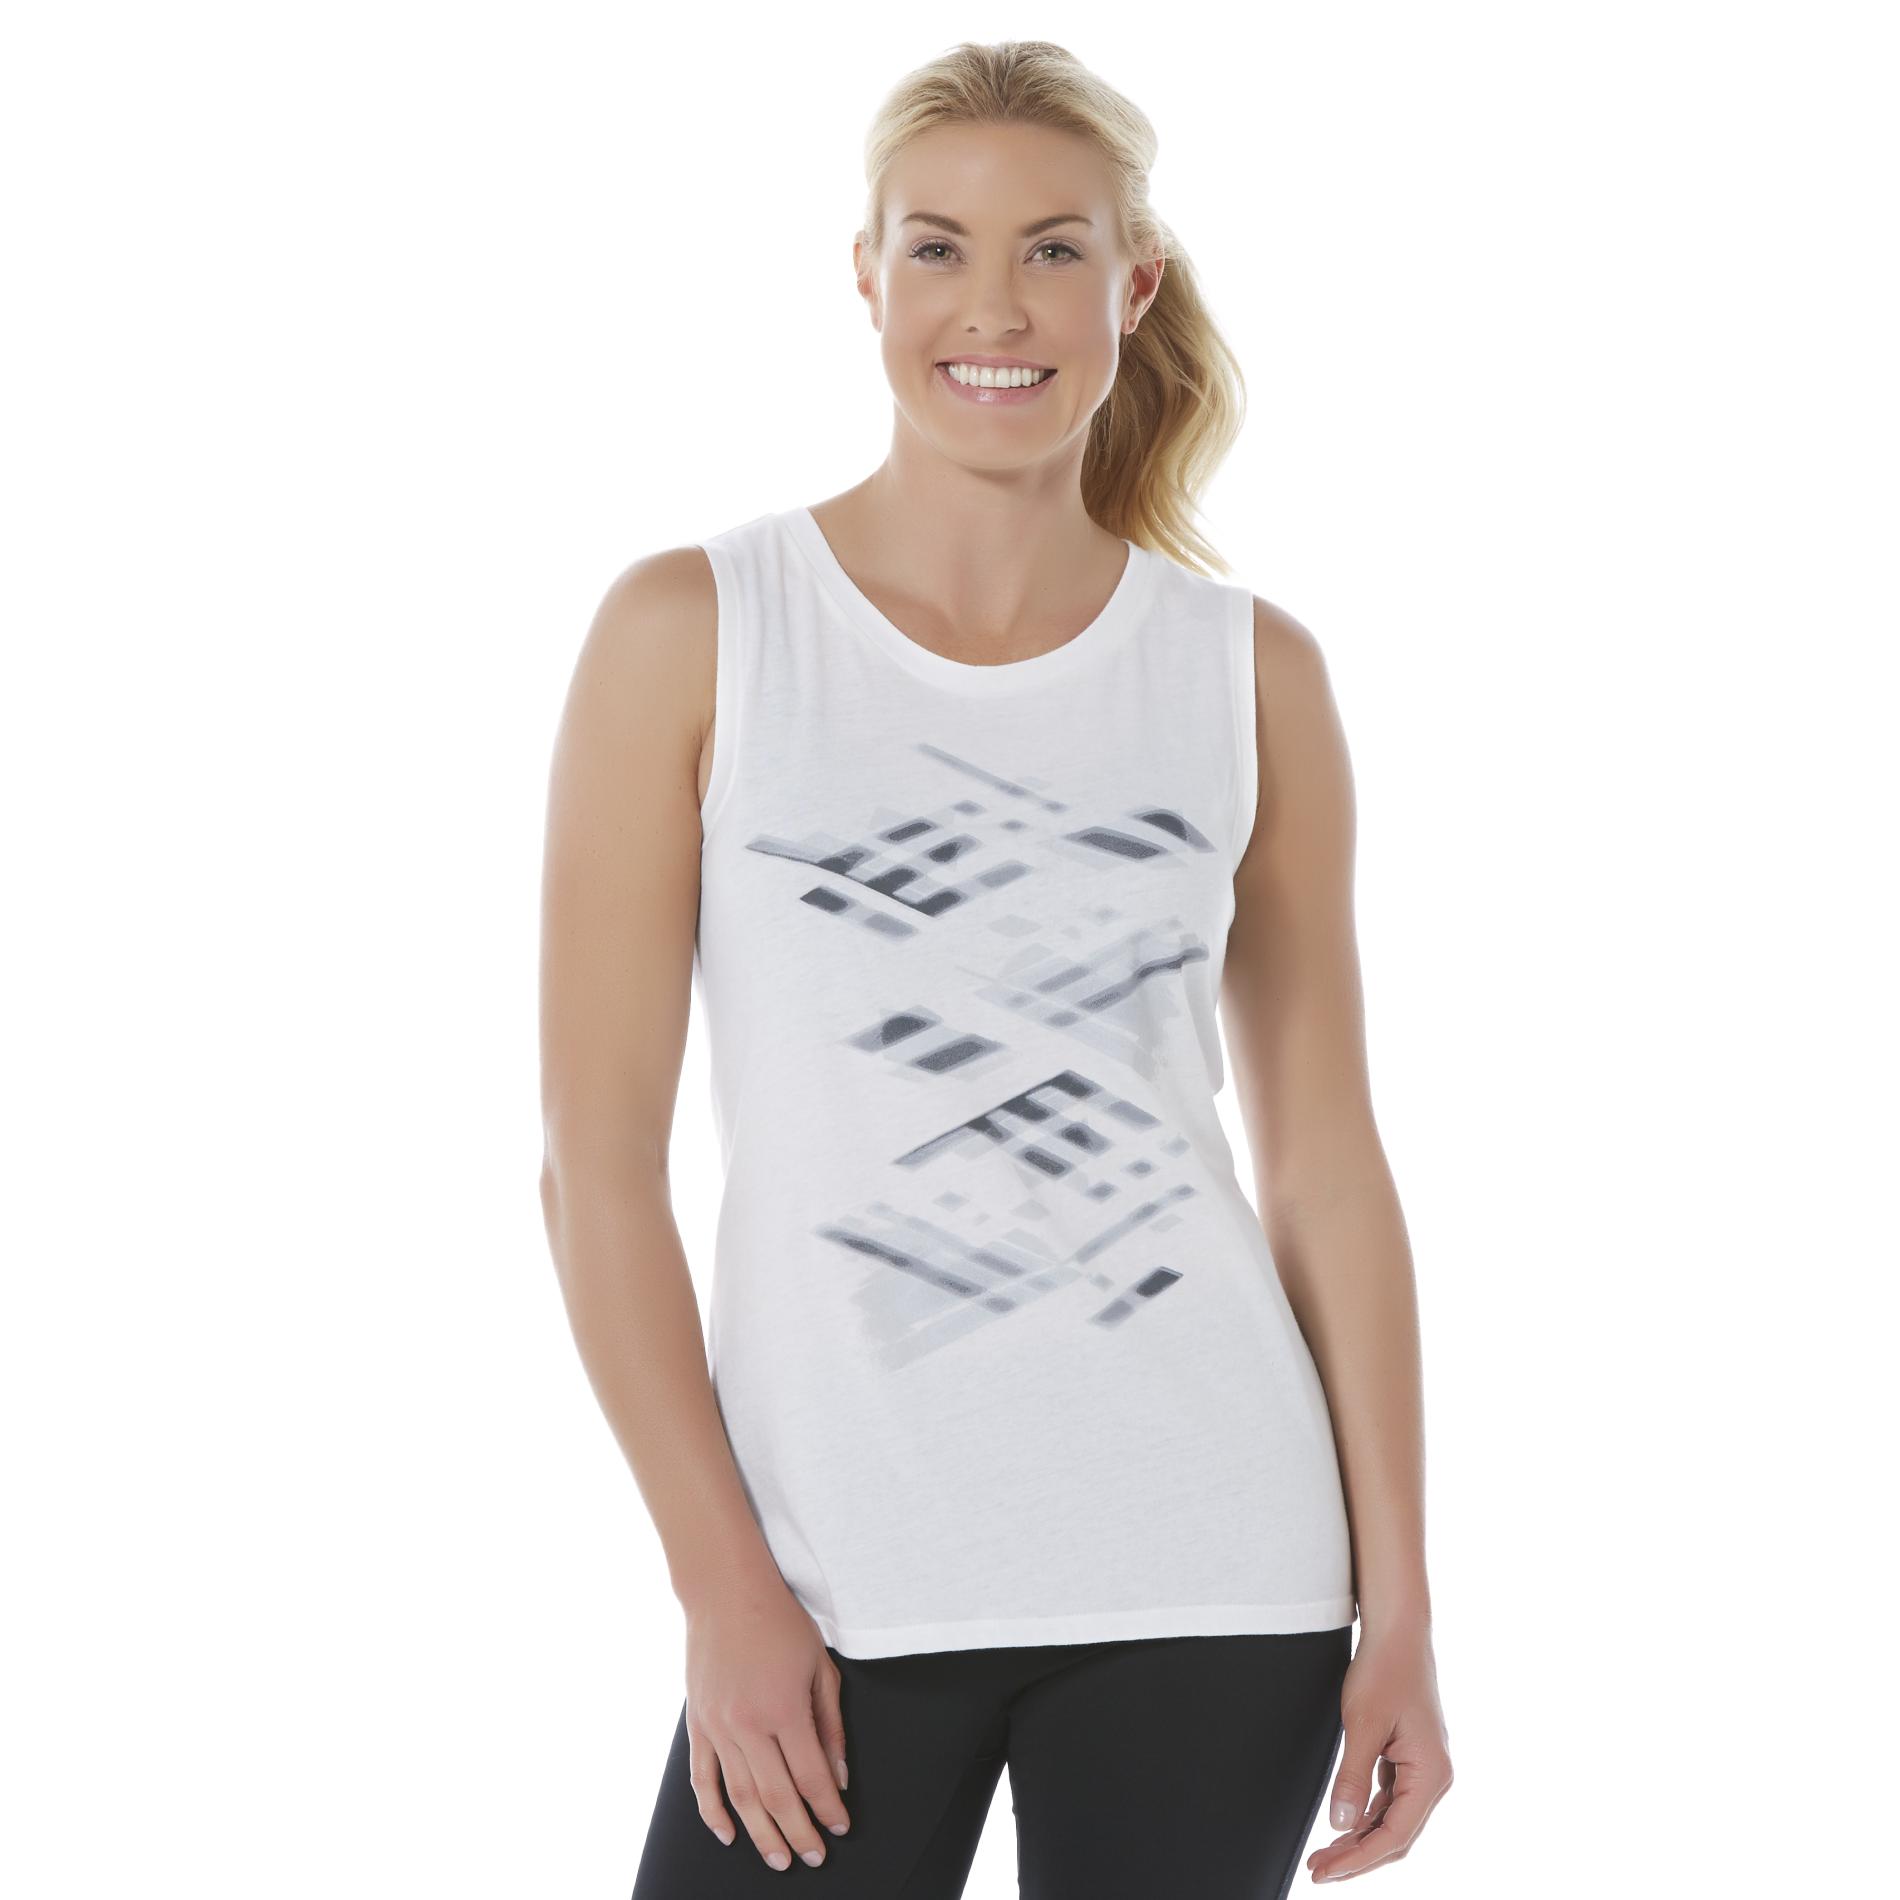 Women's Graphic Athletic Tank Top - Abstract